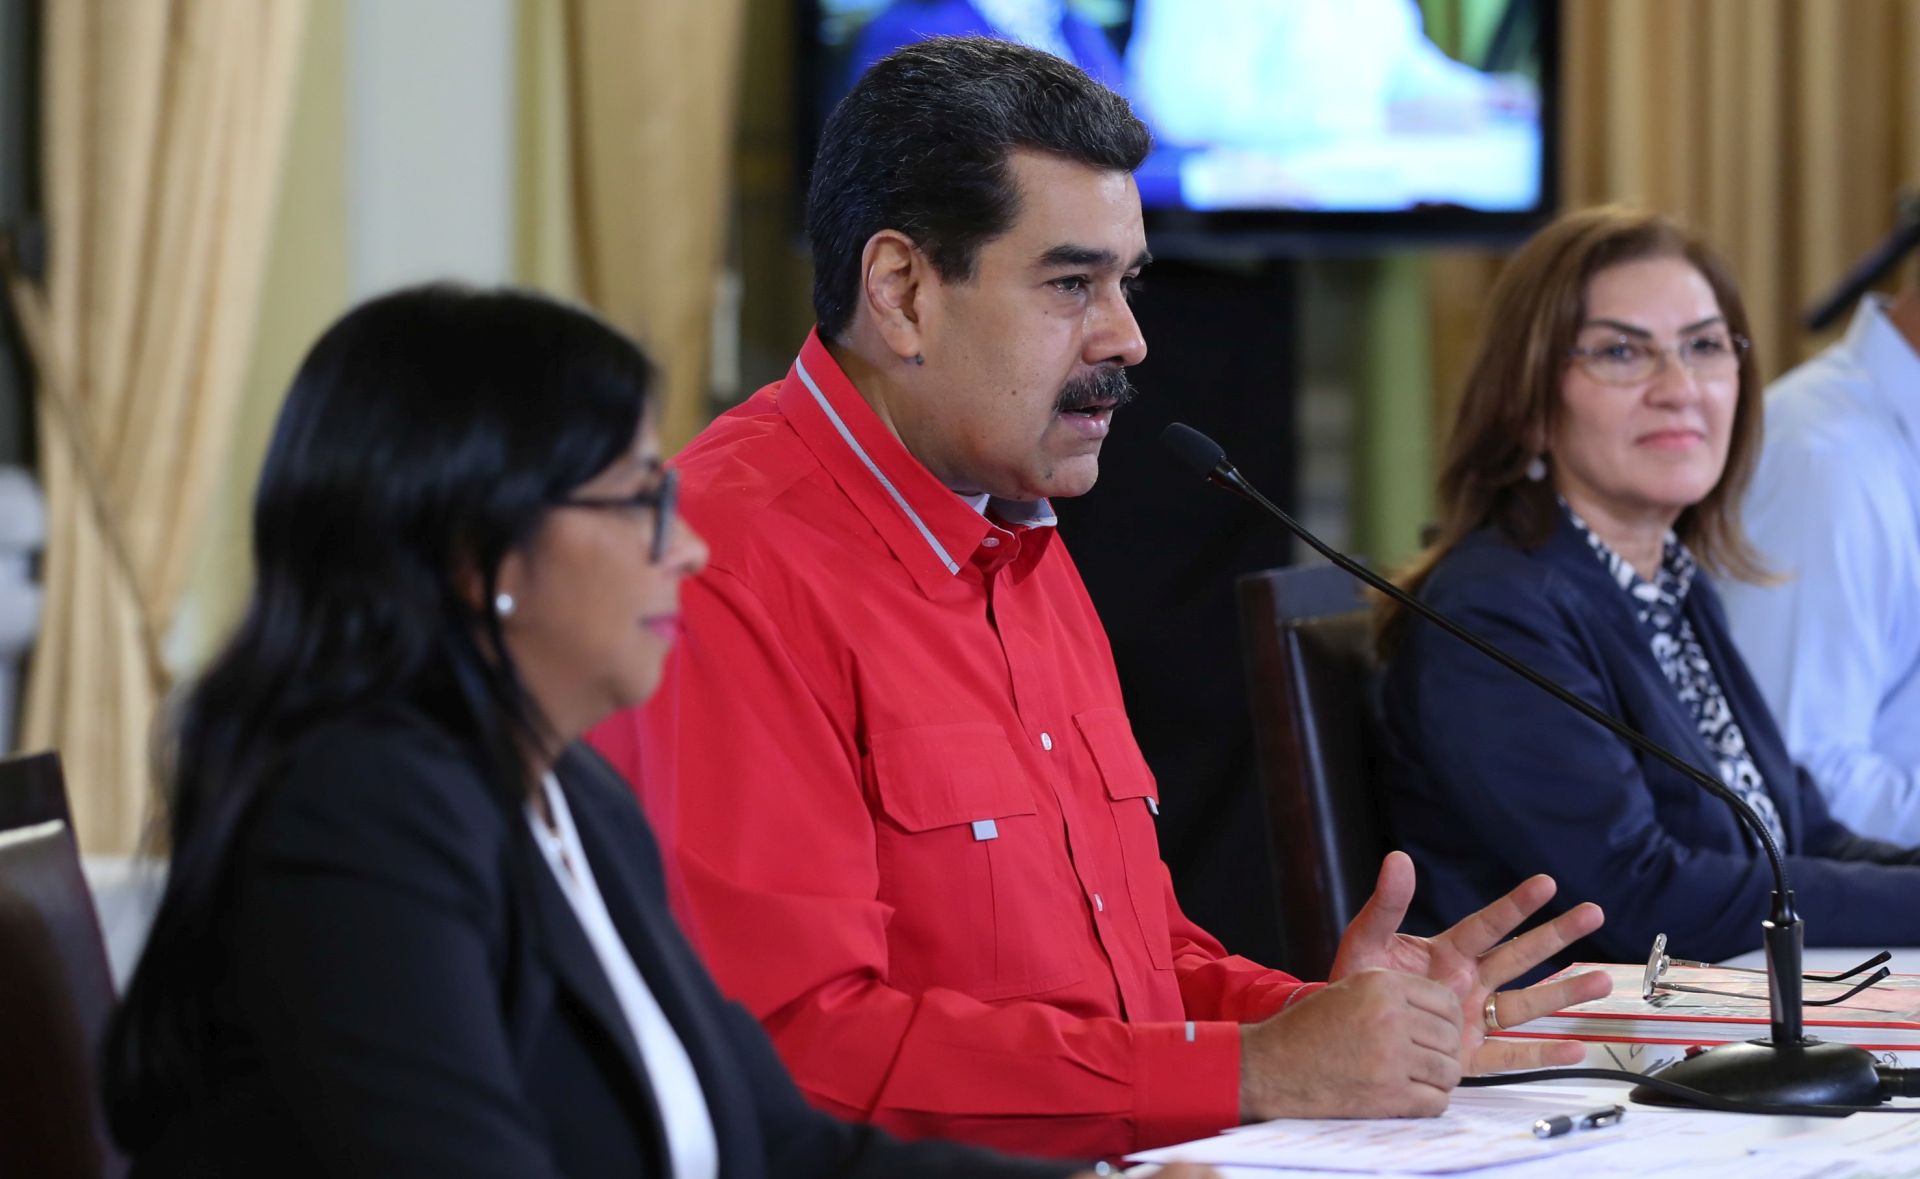 epa07690971 A handout photo made available by Miraflores press shows Venezuela's President Nicolas Maduro (C) speaks during a government event in Caracas, Venezuela, 02 July 2019. Maduro said that the exploratory process to install a dialog with opposition in Noruega shows a positive outcome although the head of Parliament Juan Guaido assured that there are no new encounters planned.  EPA/PRENSA MIRAFLORES HANDOUT  HANDOUT EDITORIAL USE ONLY/NO SALES